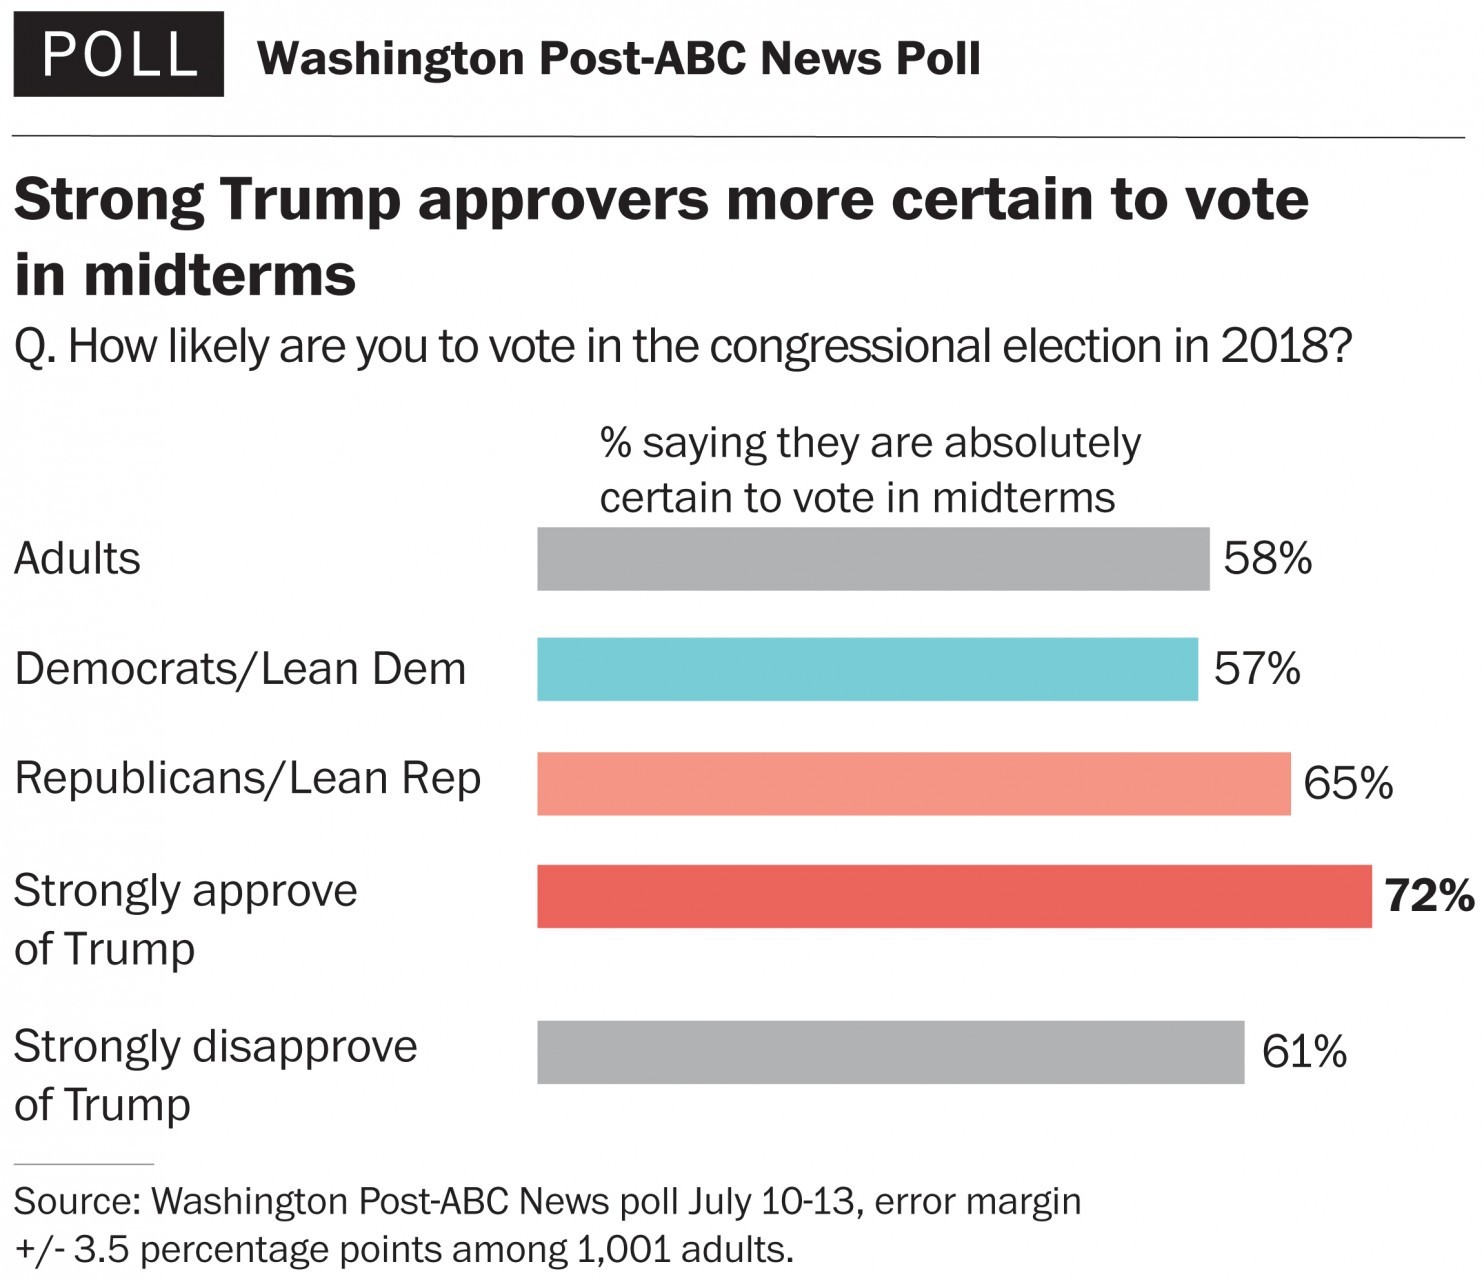 https://www.washingtonpost.com/news/the-fix/wp/2017/07/19/this-poll-is-a-warning-sign-for-democrats/?utm_term=.5779f876de1a